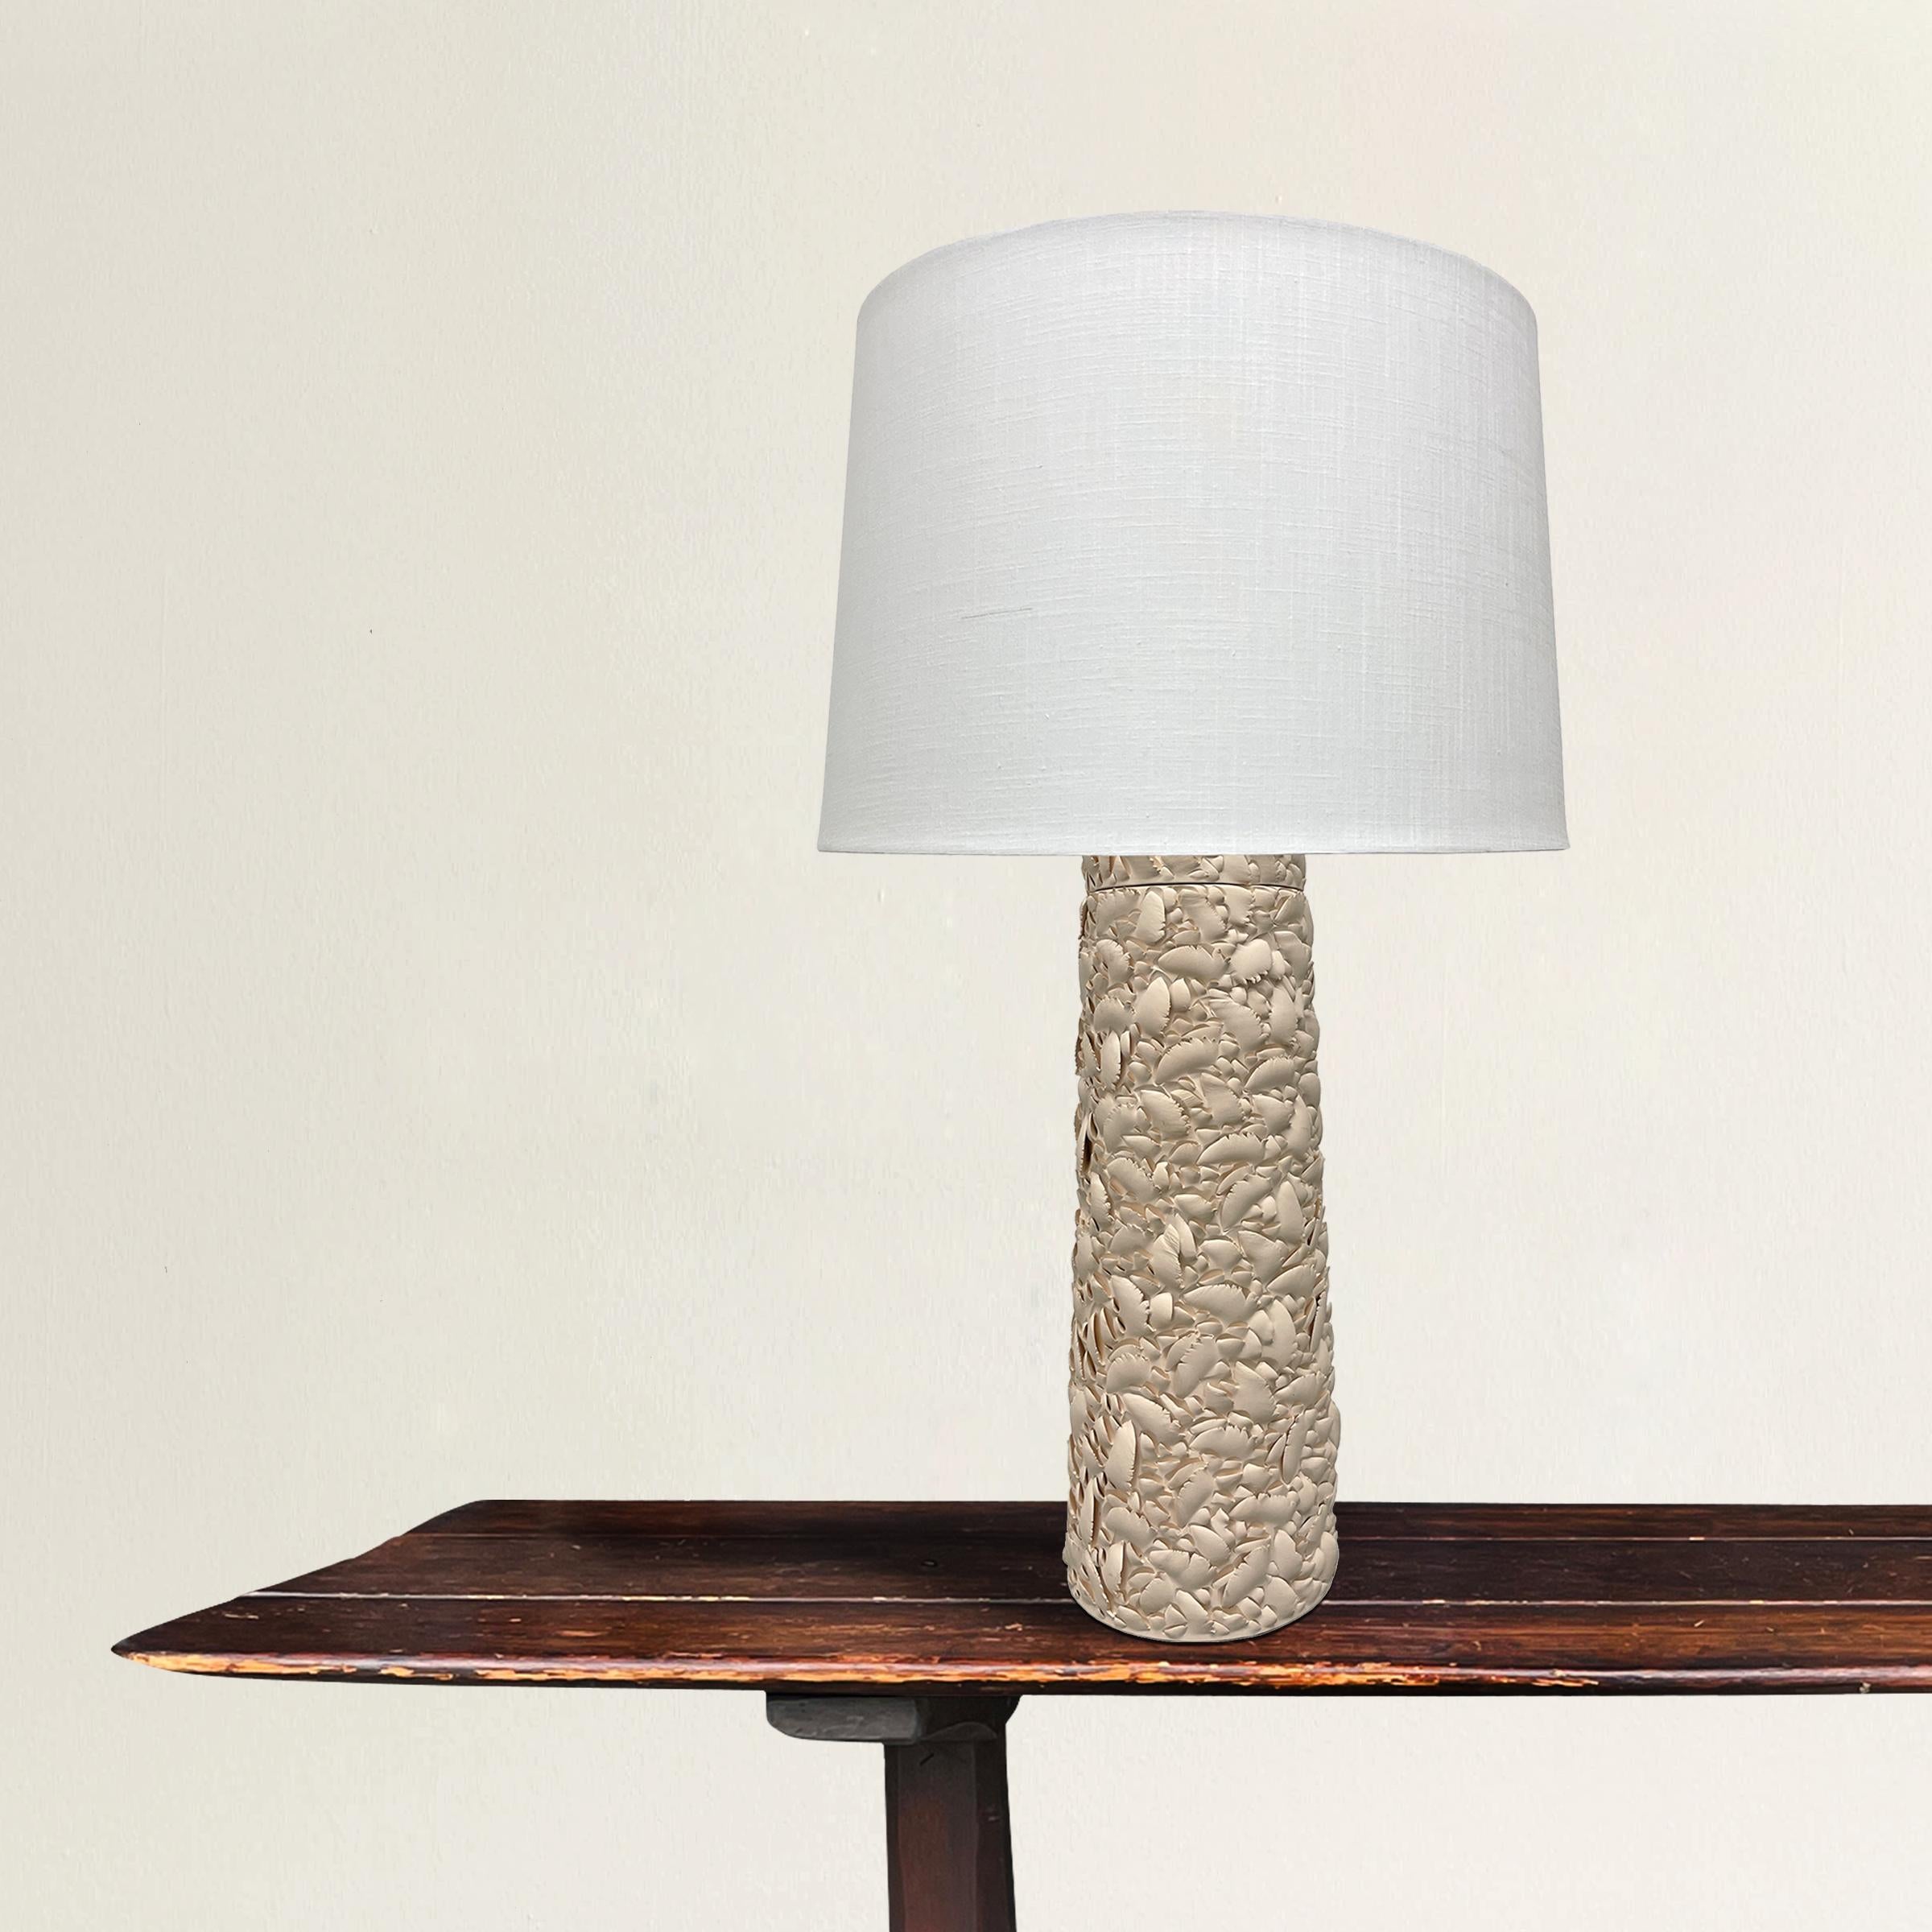 An incredible artist-made porcelain table lamp with the most amazing texture made by cutting into the surface of the smooth porcelain thousands of times. An unbelievable piece that can hold its own in any modern or traditional interior! New white